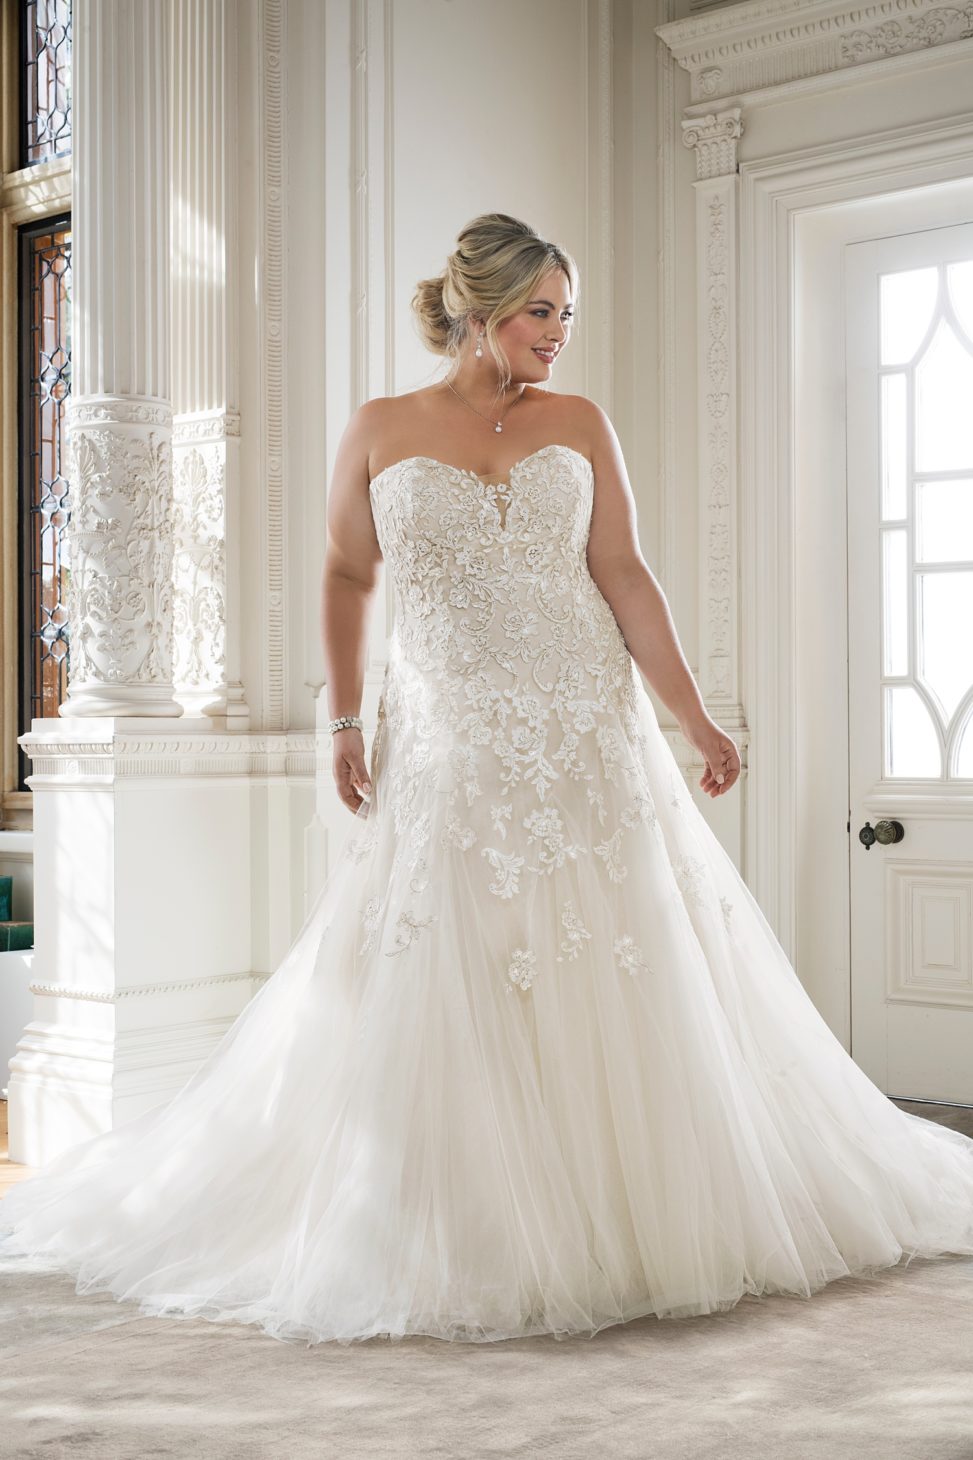 Wedding Dress Sophia Tolli Y11866 "Adonia", available in sizes 0-28